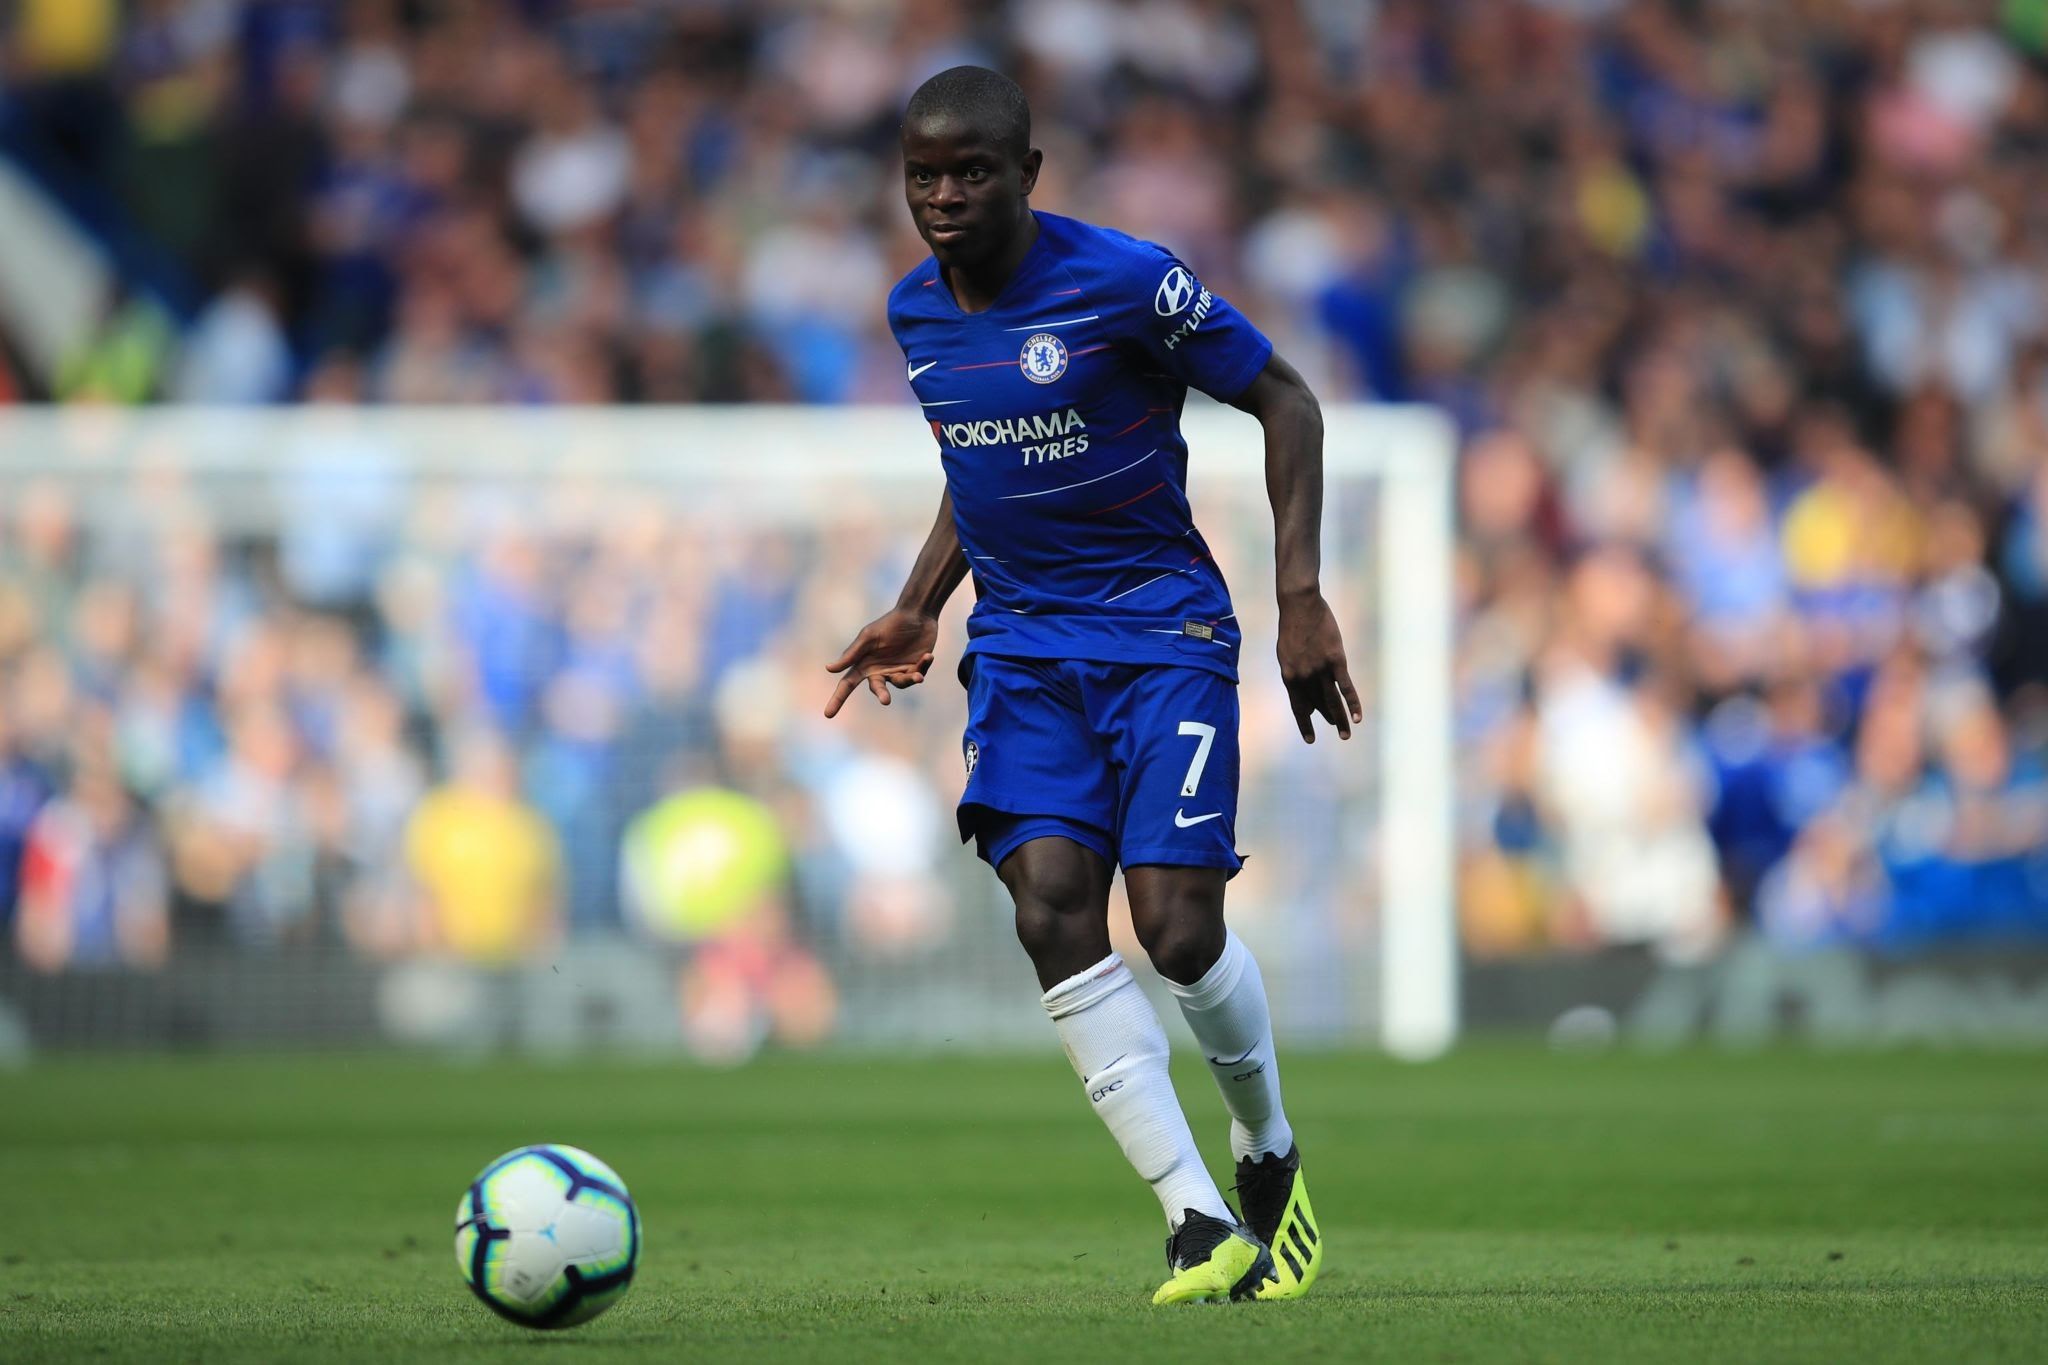 Chelsea's N'Golo Kante to miss games due to COVID-19